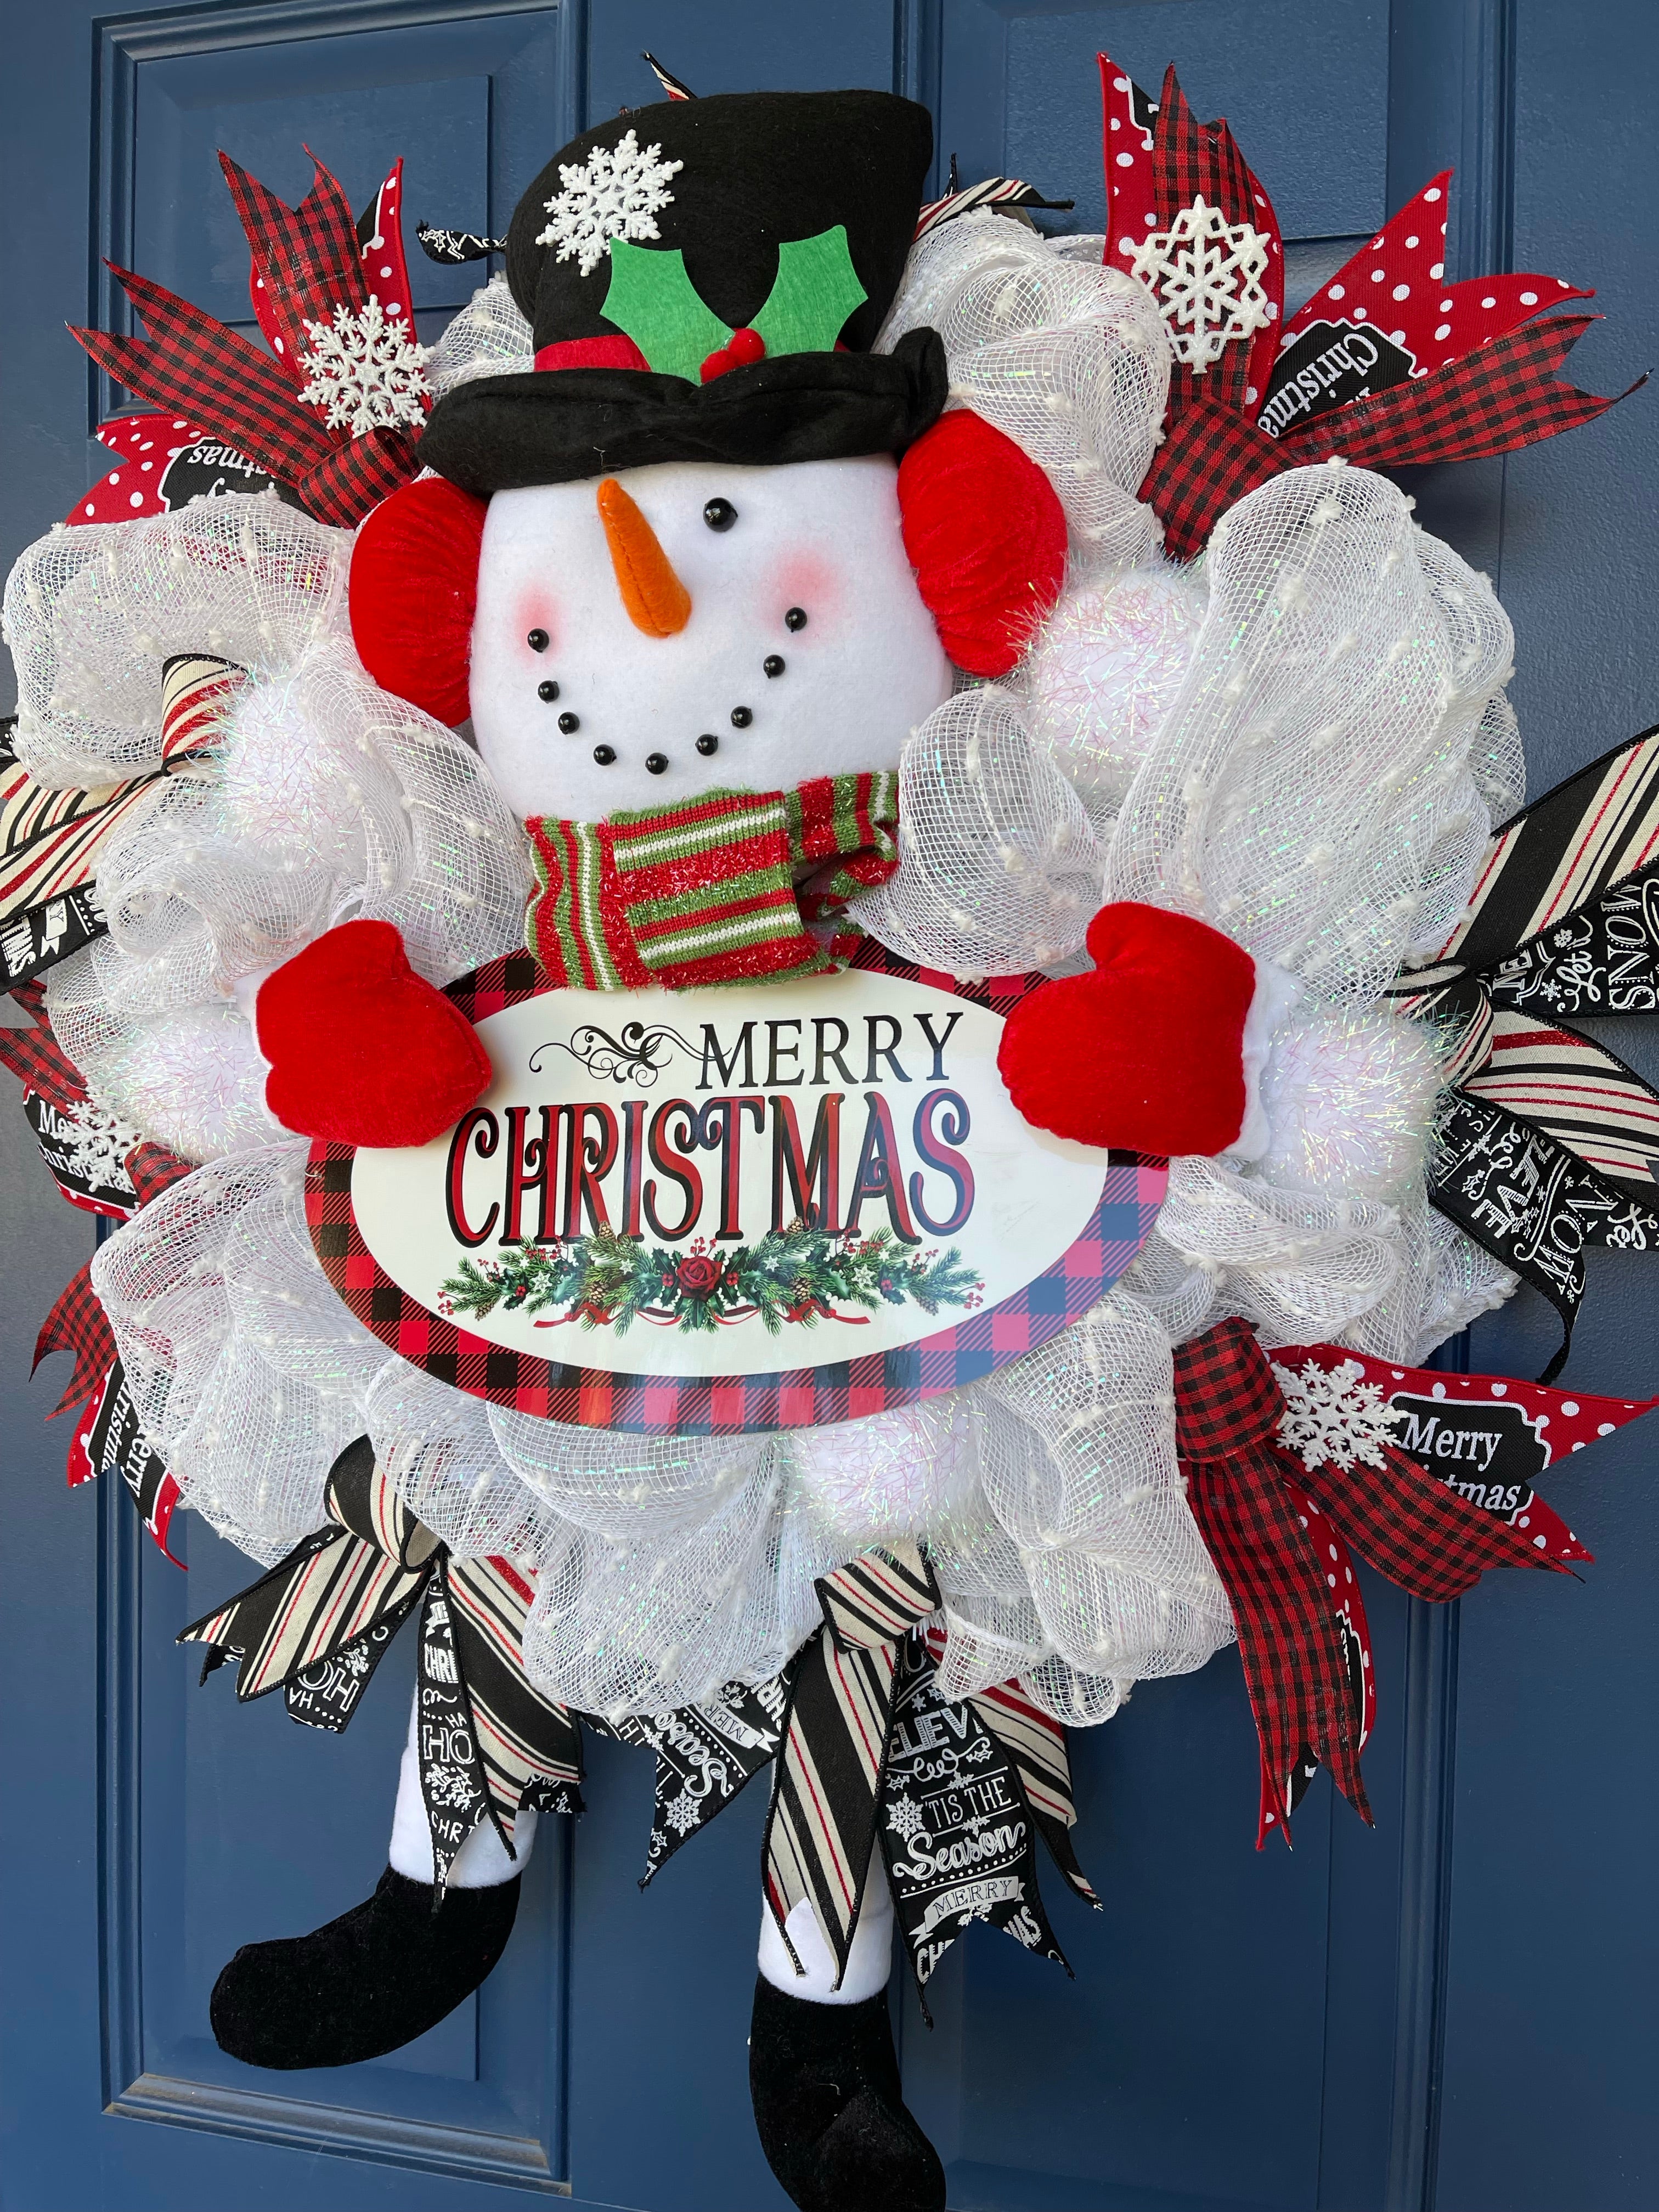 Right Side View of Red, White and Black Snowman Plush Deco Mesh Wreath holding a Merry Christmas Sign on a blue door